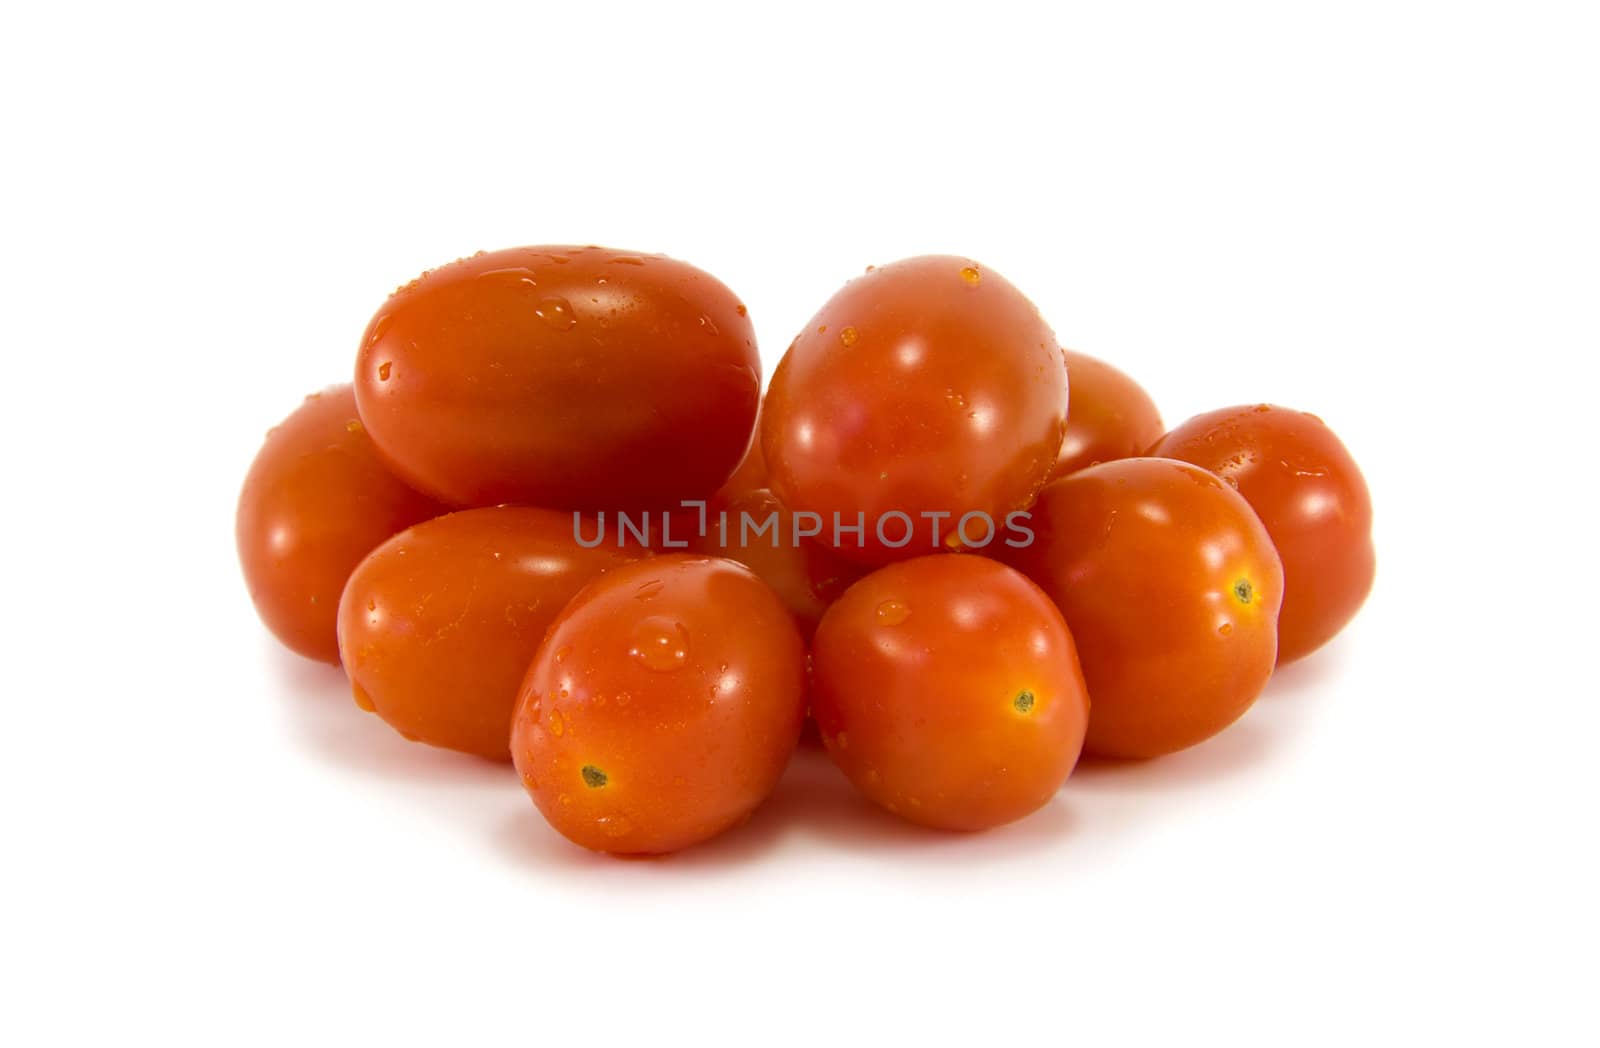 Rosa Tomatoes isolated on a white background